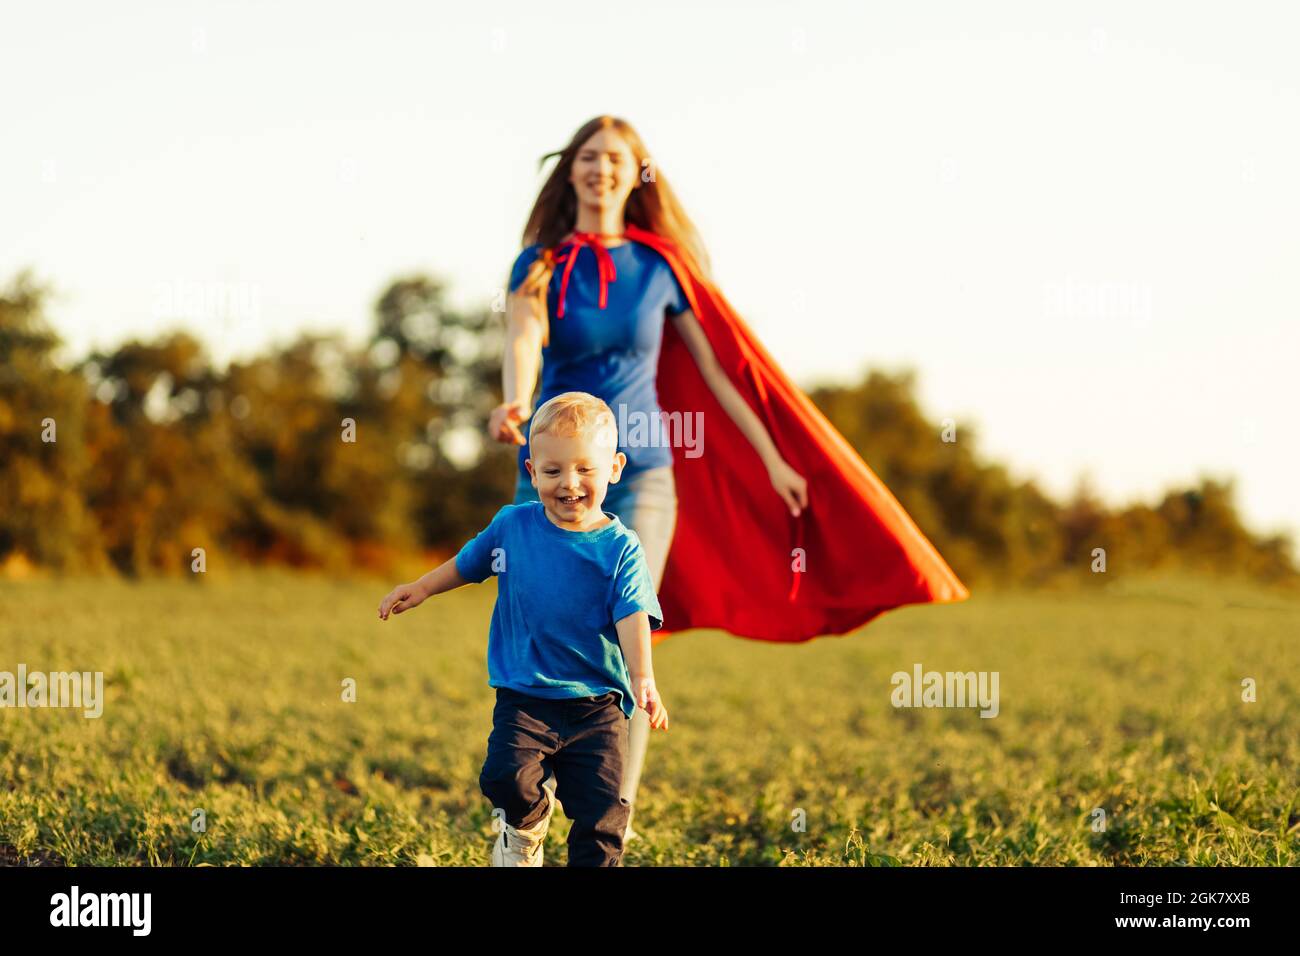 concept of super mom with baby, mom with super hero cloak runs after baby, outdoors, in nature at sunset Stock Photo